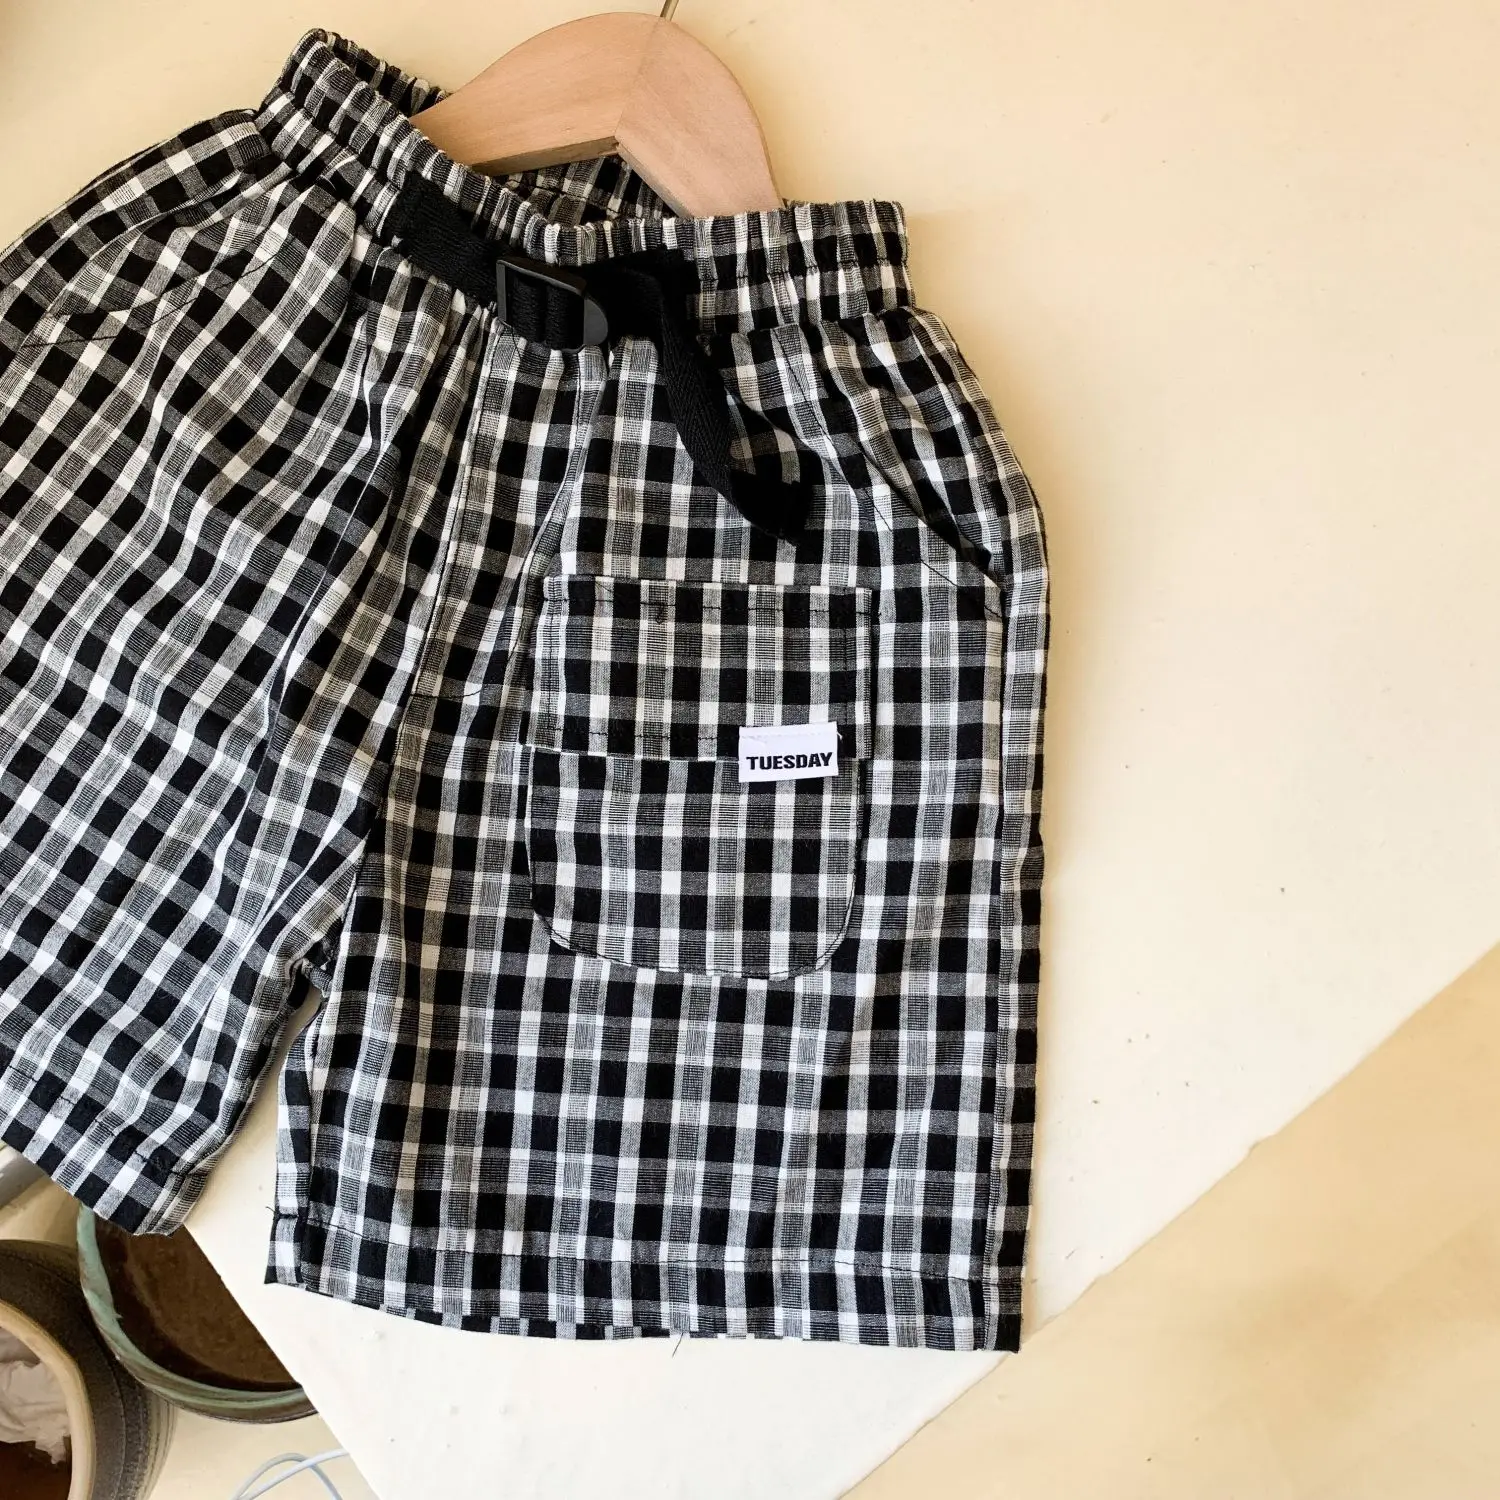 2022 Boys' new summer children's shorts, casual plaid British design pants breathable and comfortable